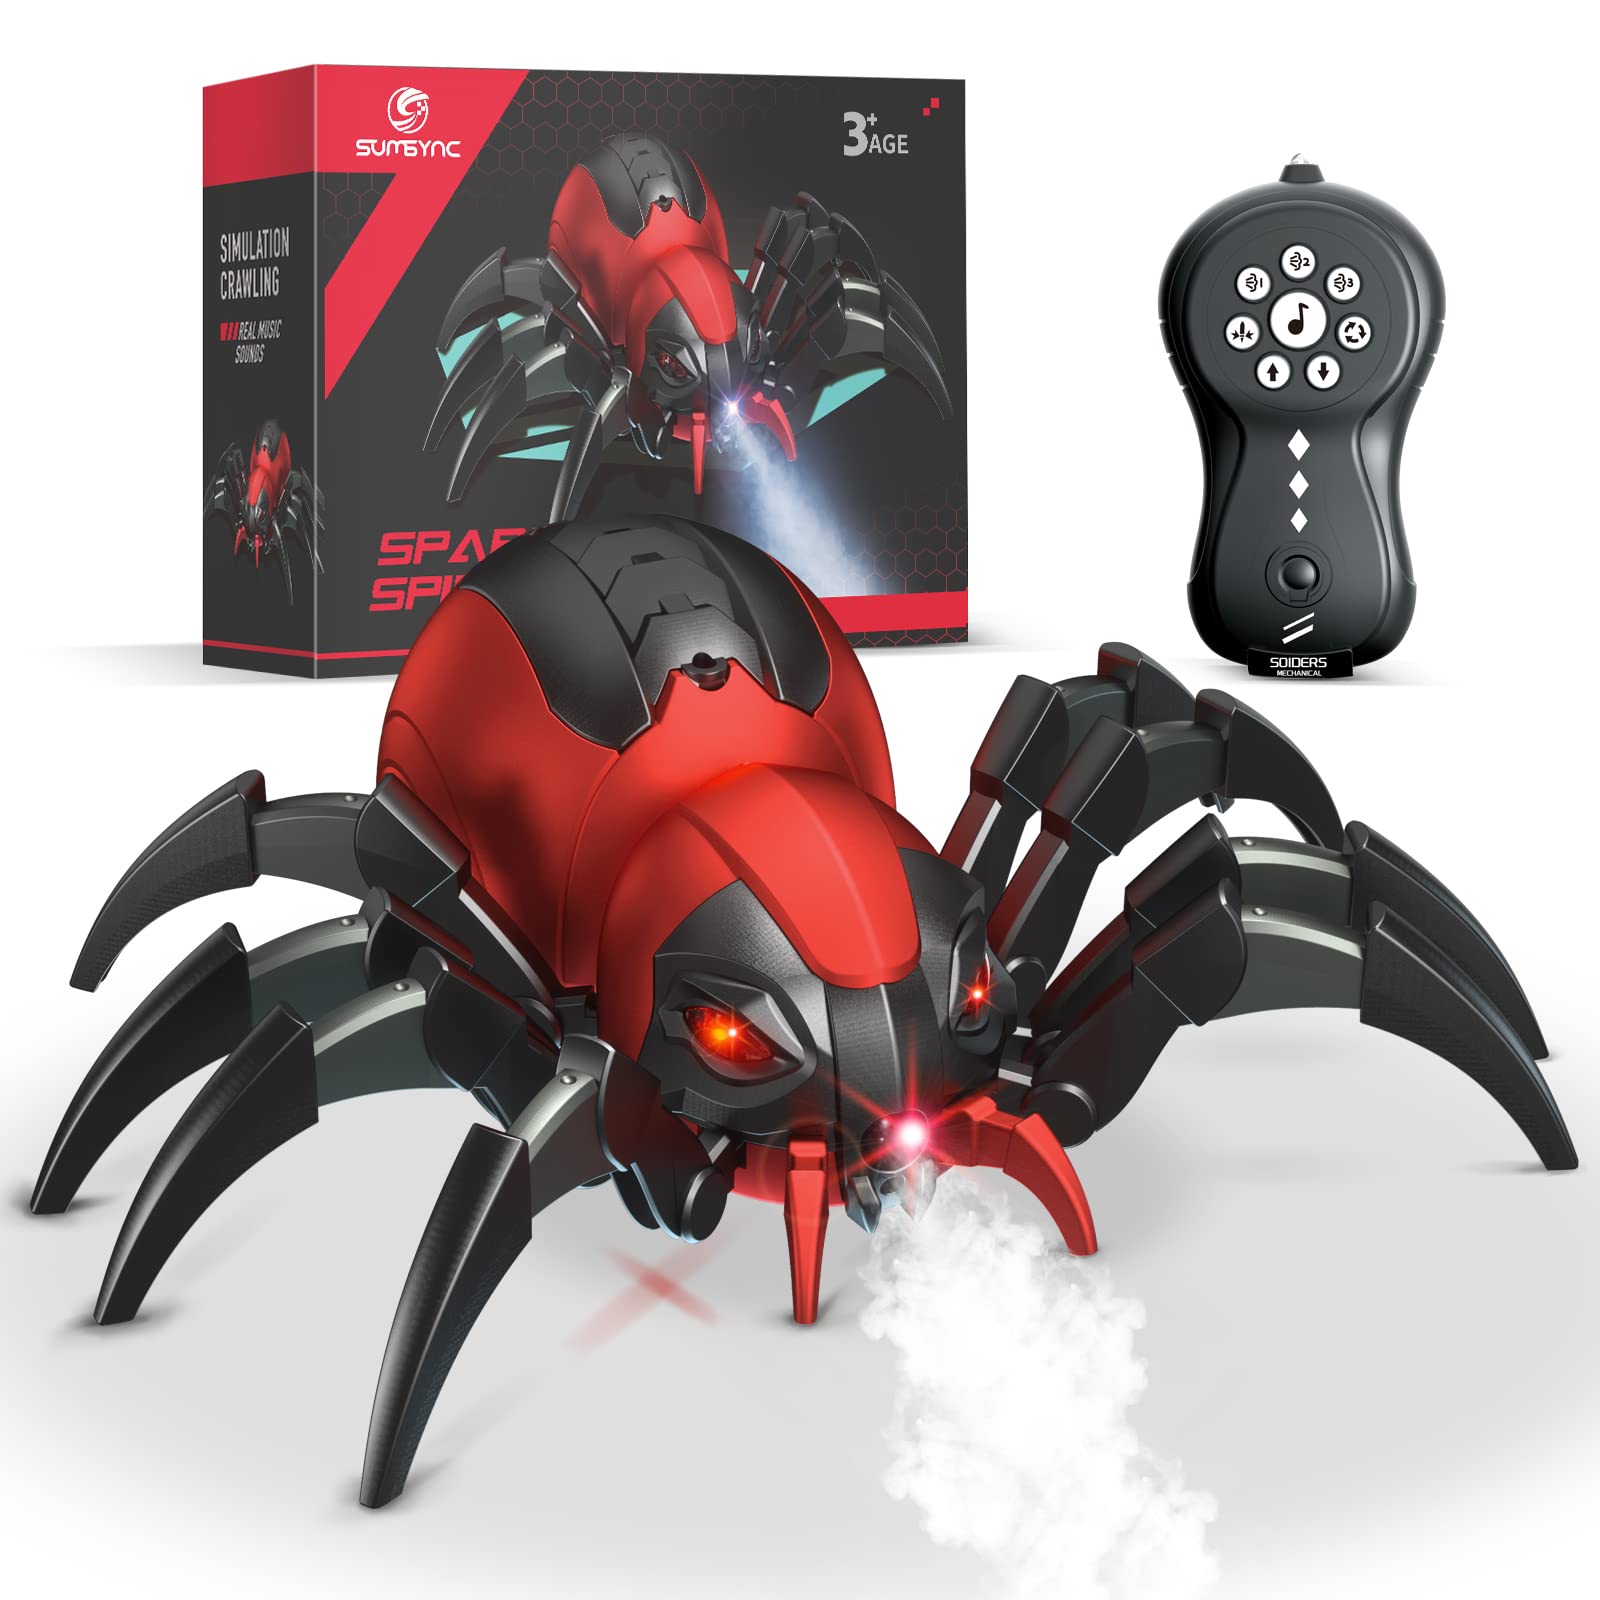 sumsync Remote Control Spider Kids Toys - Realistic RC Spider, Music Effect, LED Light, Toys for 3 4 5 6 7 8 9 10 11 12+ Year Old Boys/Girls, Gifts for Halloween Christmas Easter Birthday